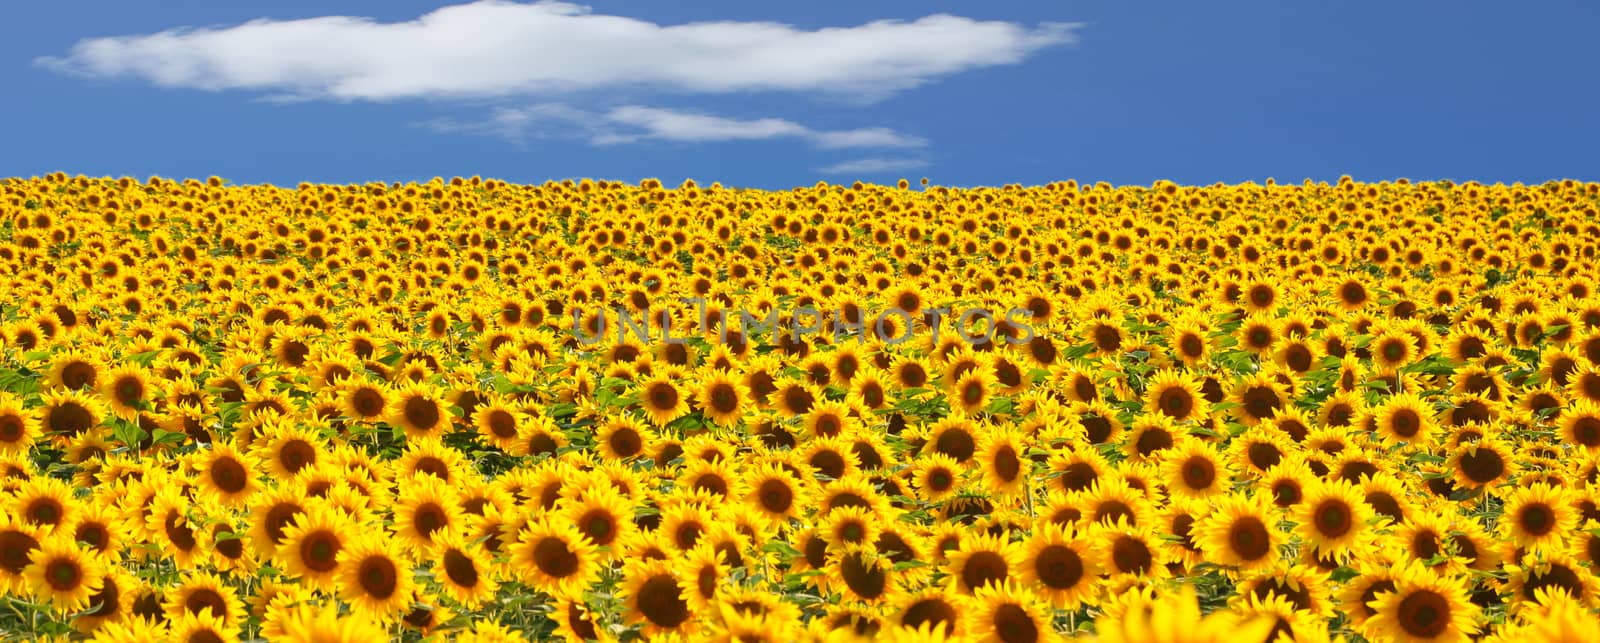 Field of sunflower against a blue sky